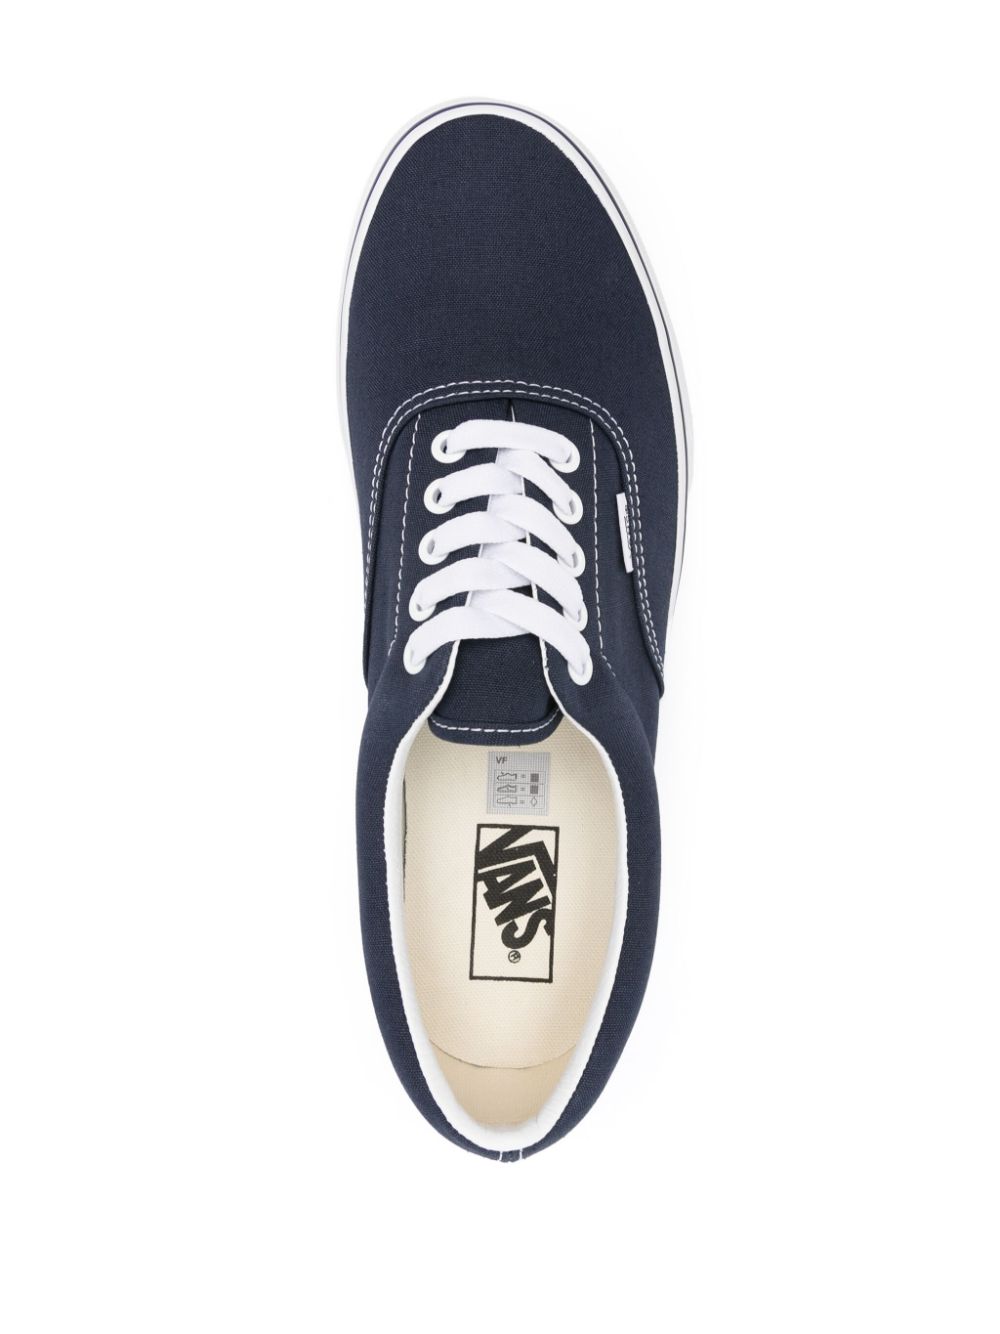 Authentic canvas sneakers<BR/><BR/><BR/>